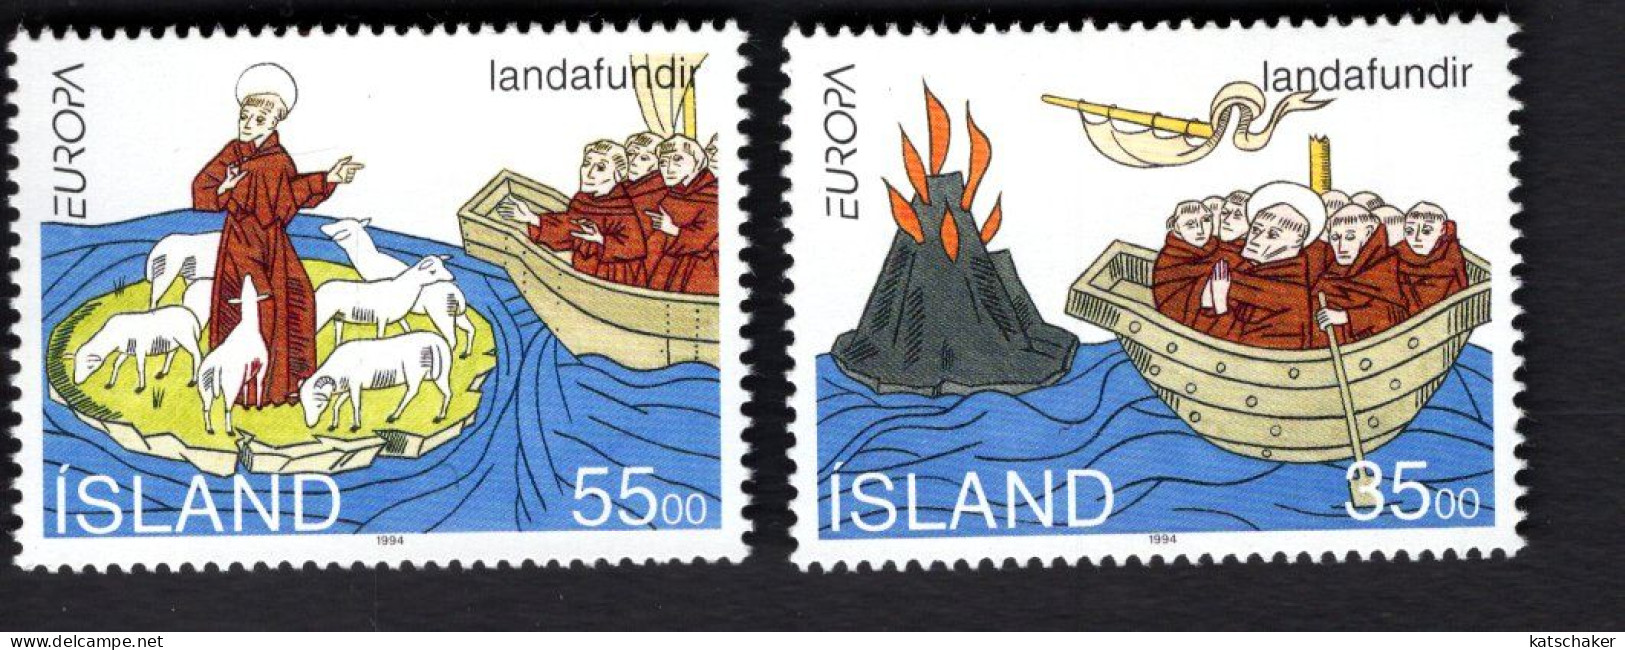 2021745251 1994 SCOTT 780 781 (XX)  POSTFRIS MINT NEVER HINGED - EUROPA ISSUE -  VOYAGES OF ST. BRENDAN - Unused Stamps